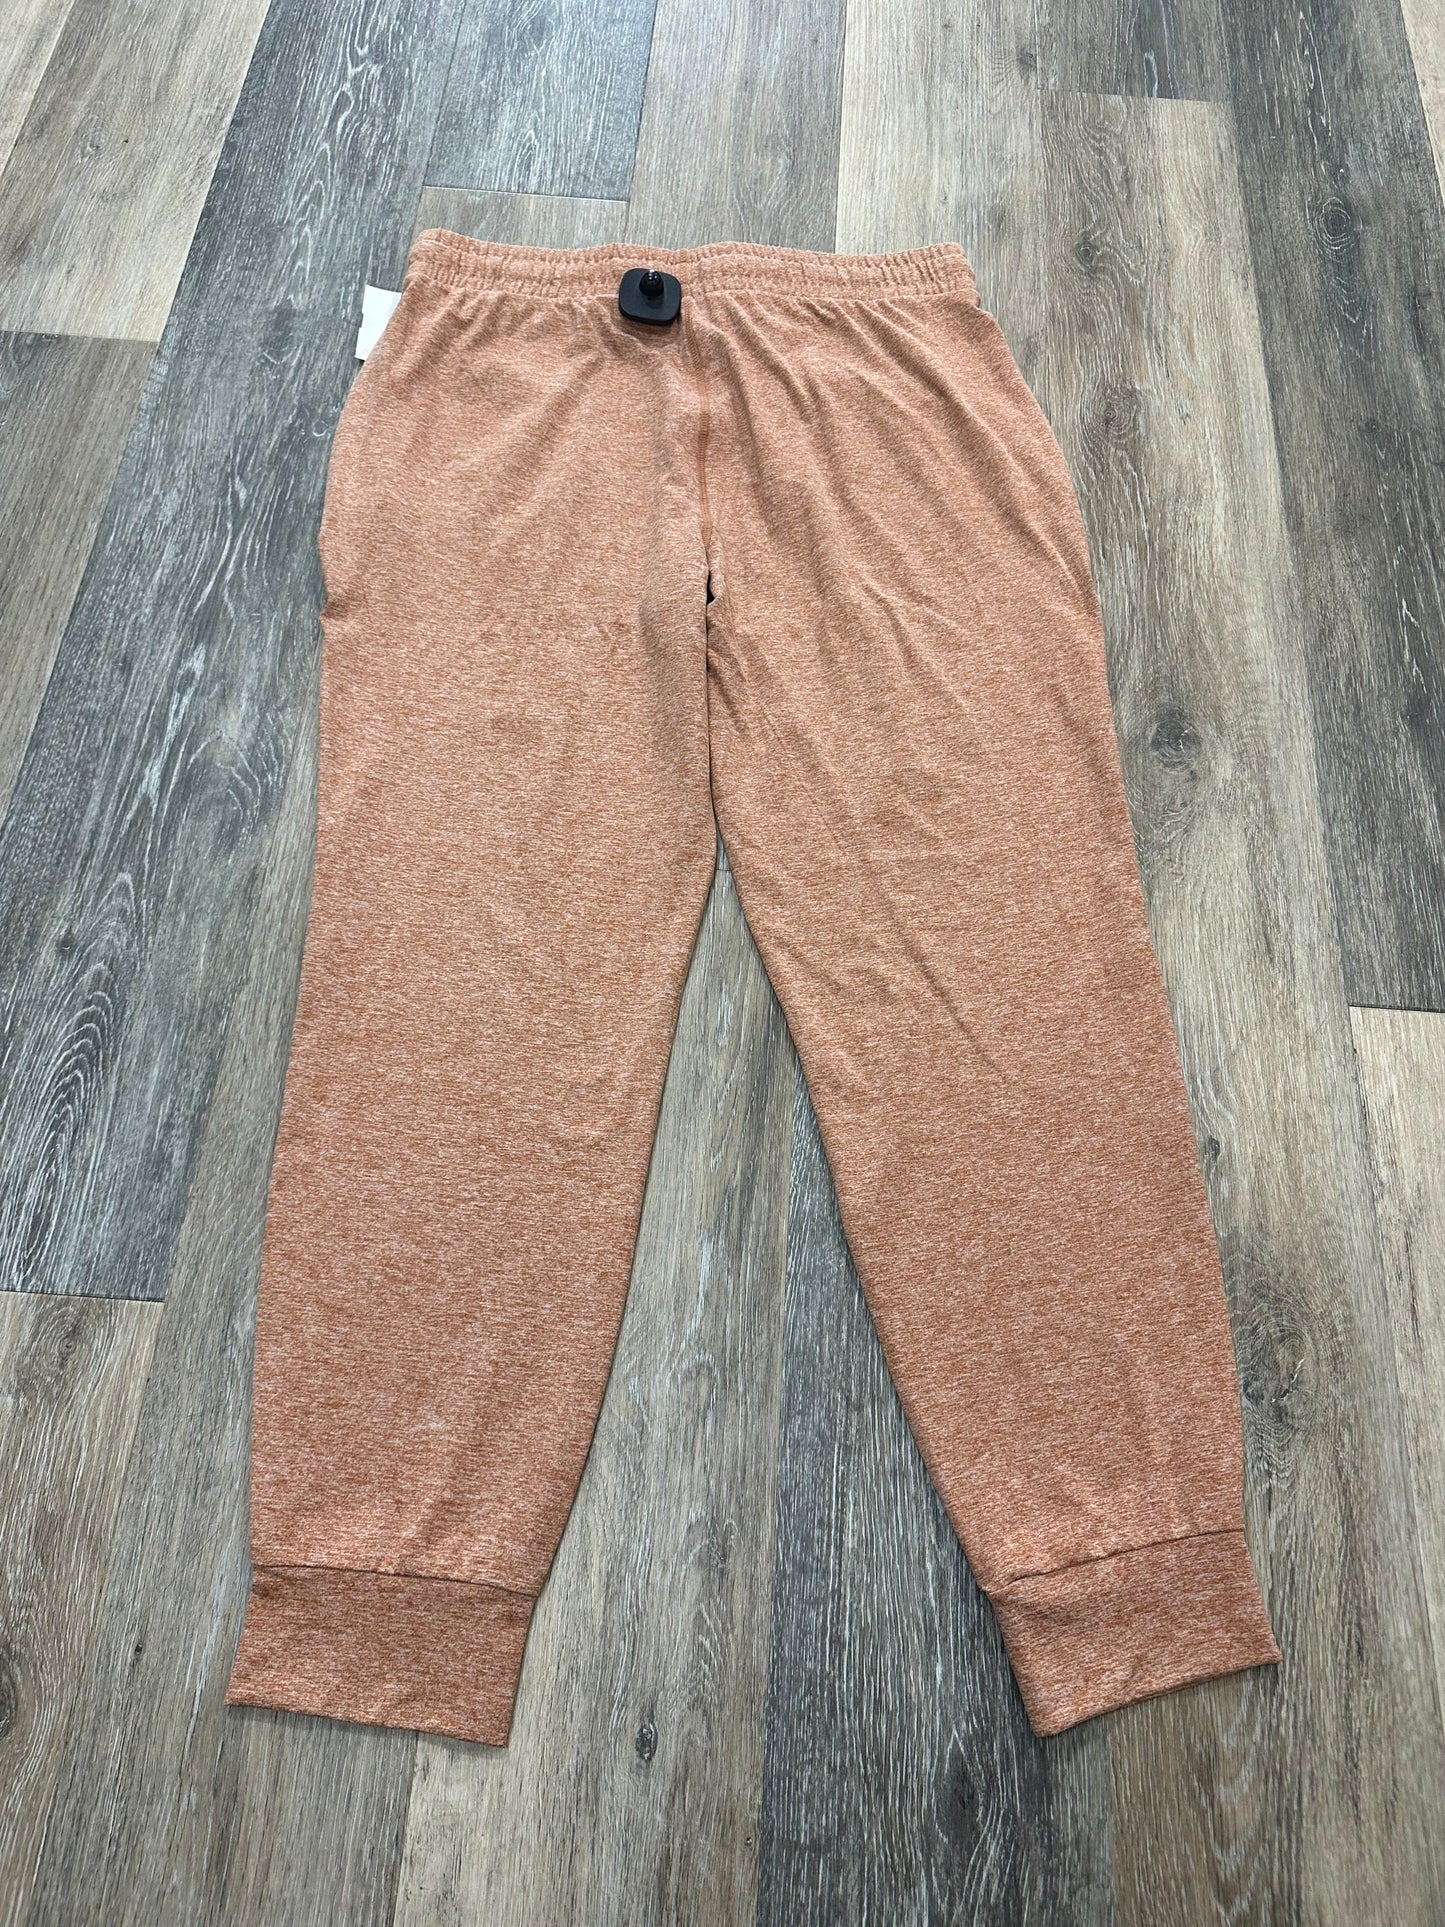 Lounge Set Pants By Thread And Supply  Size: M